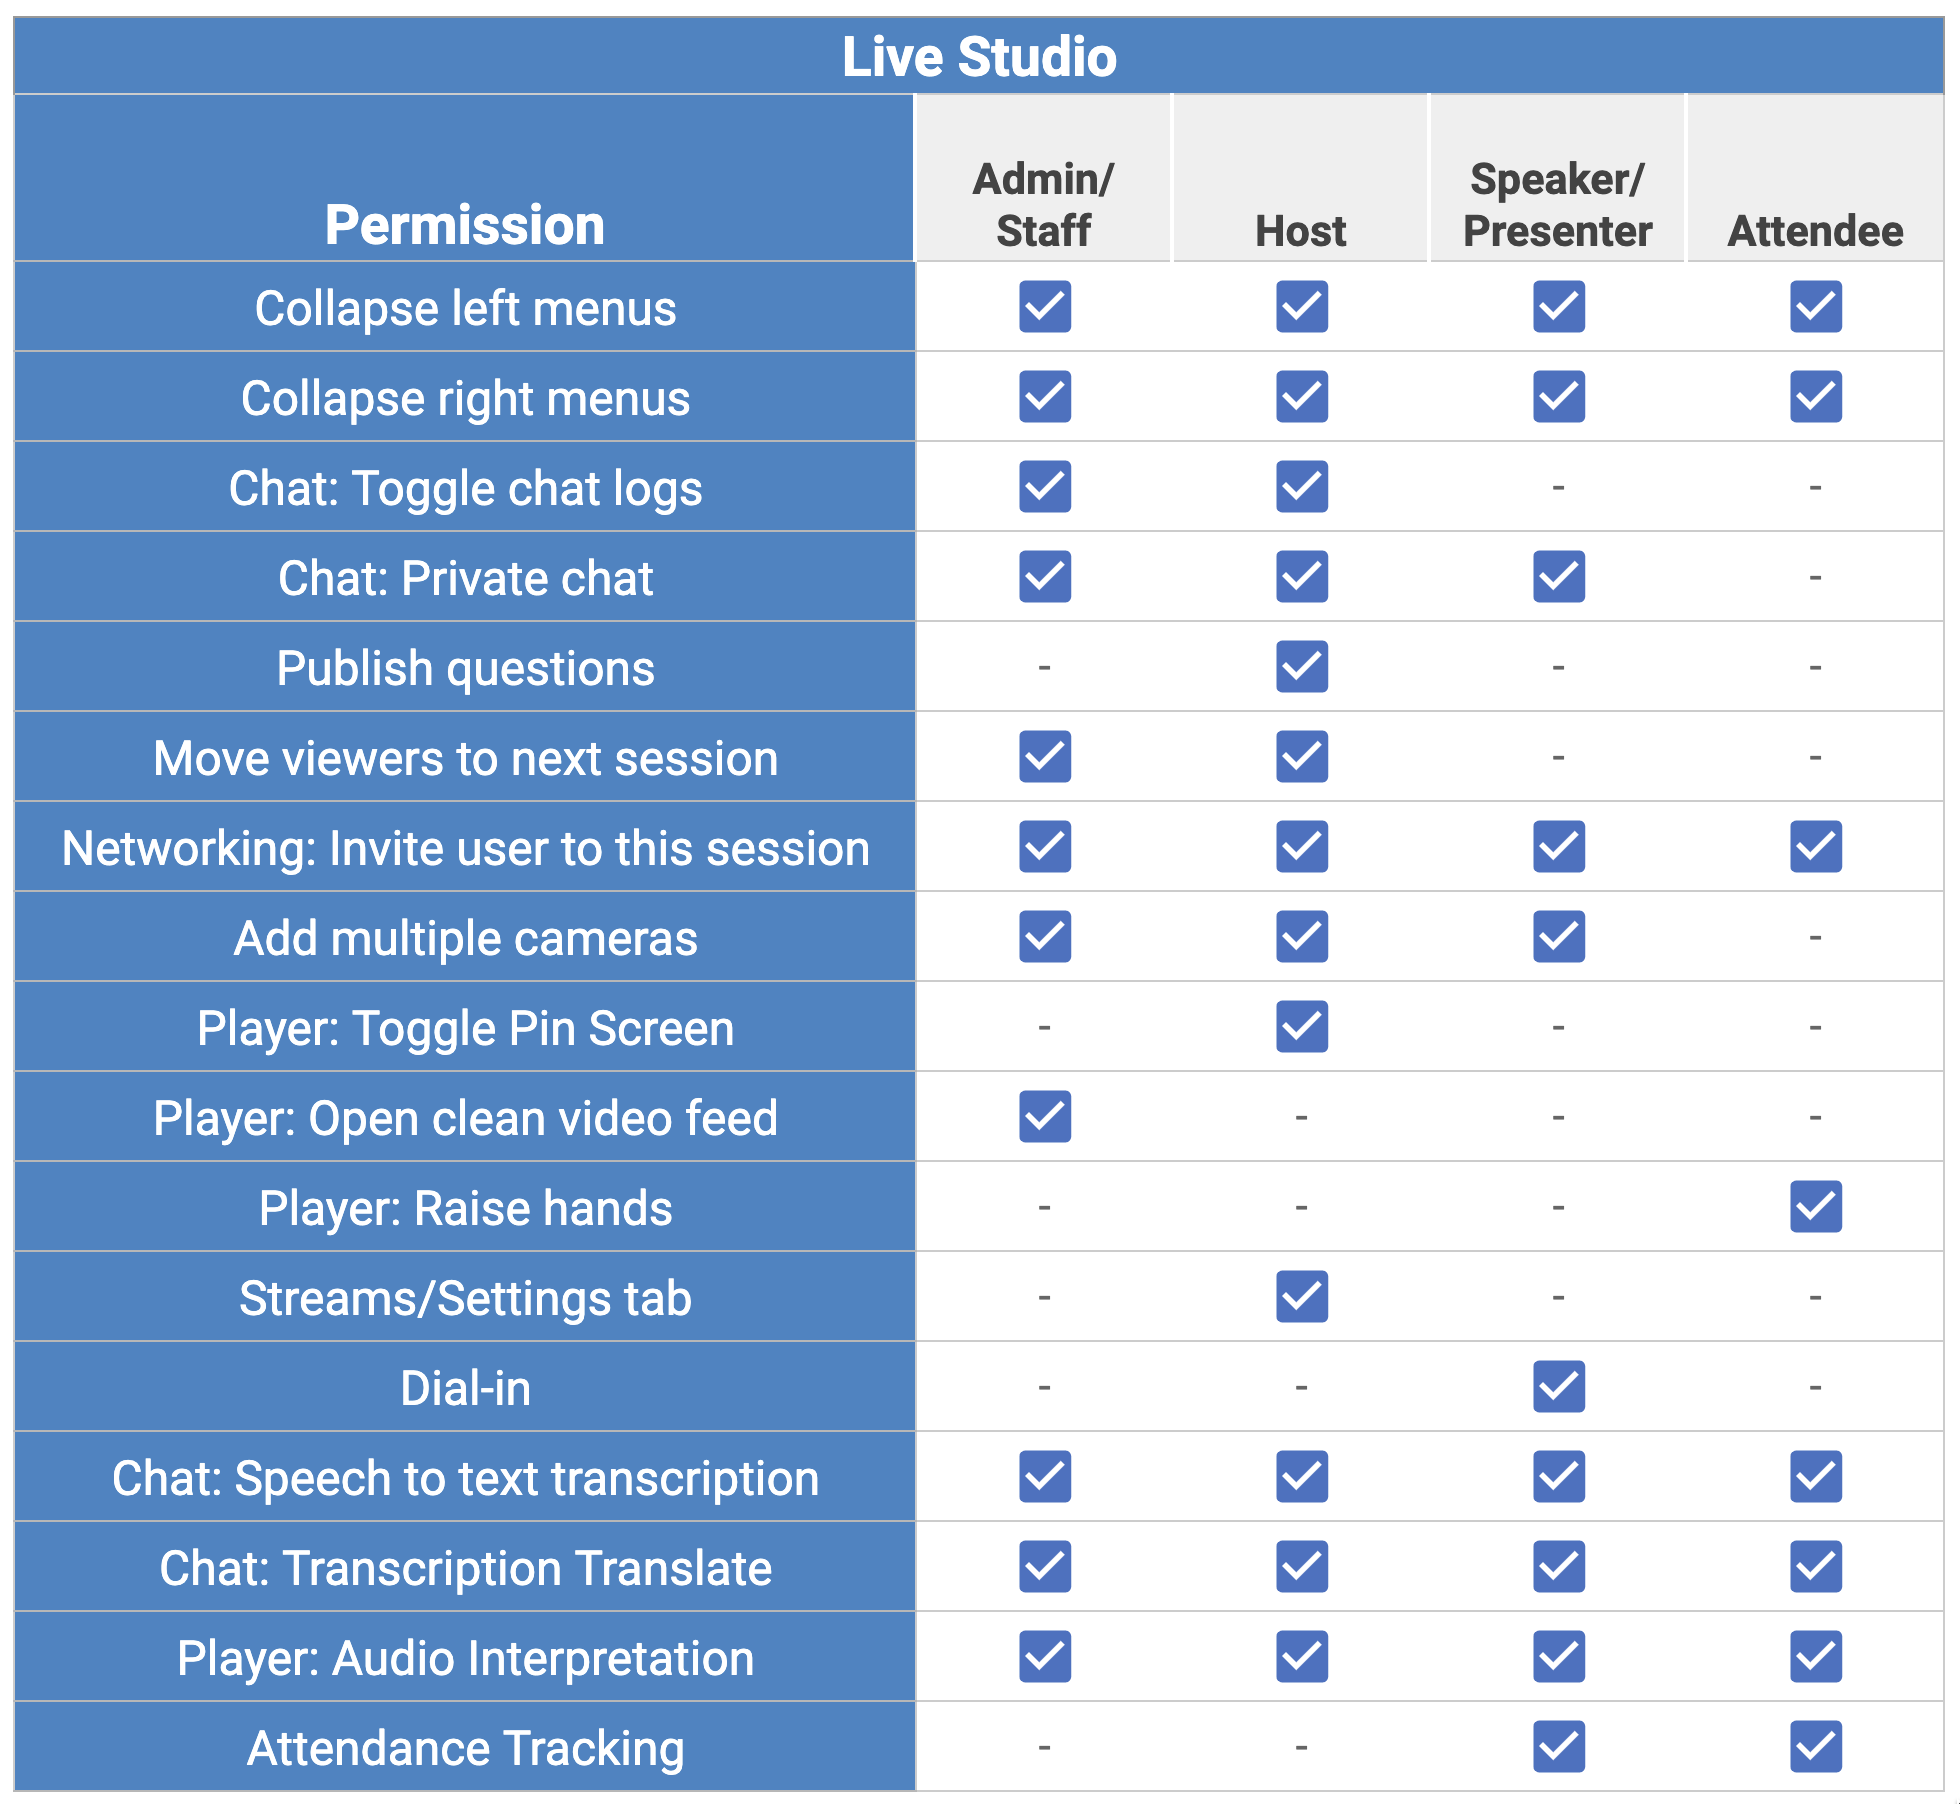 Table showing what each permission level can do in the Live Studio